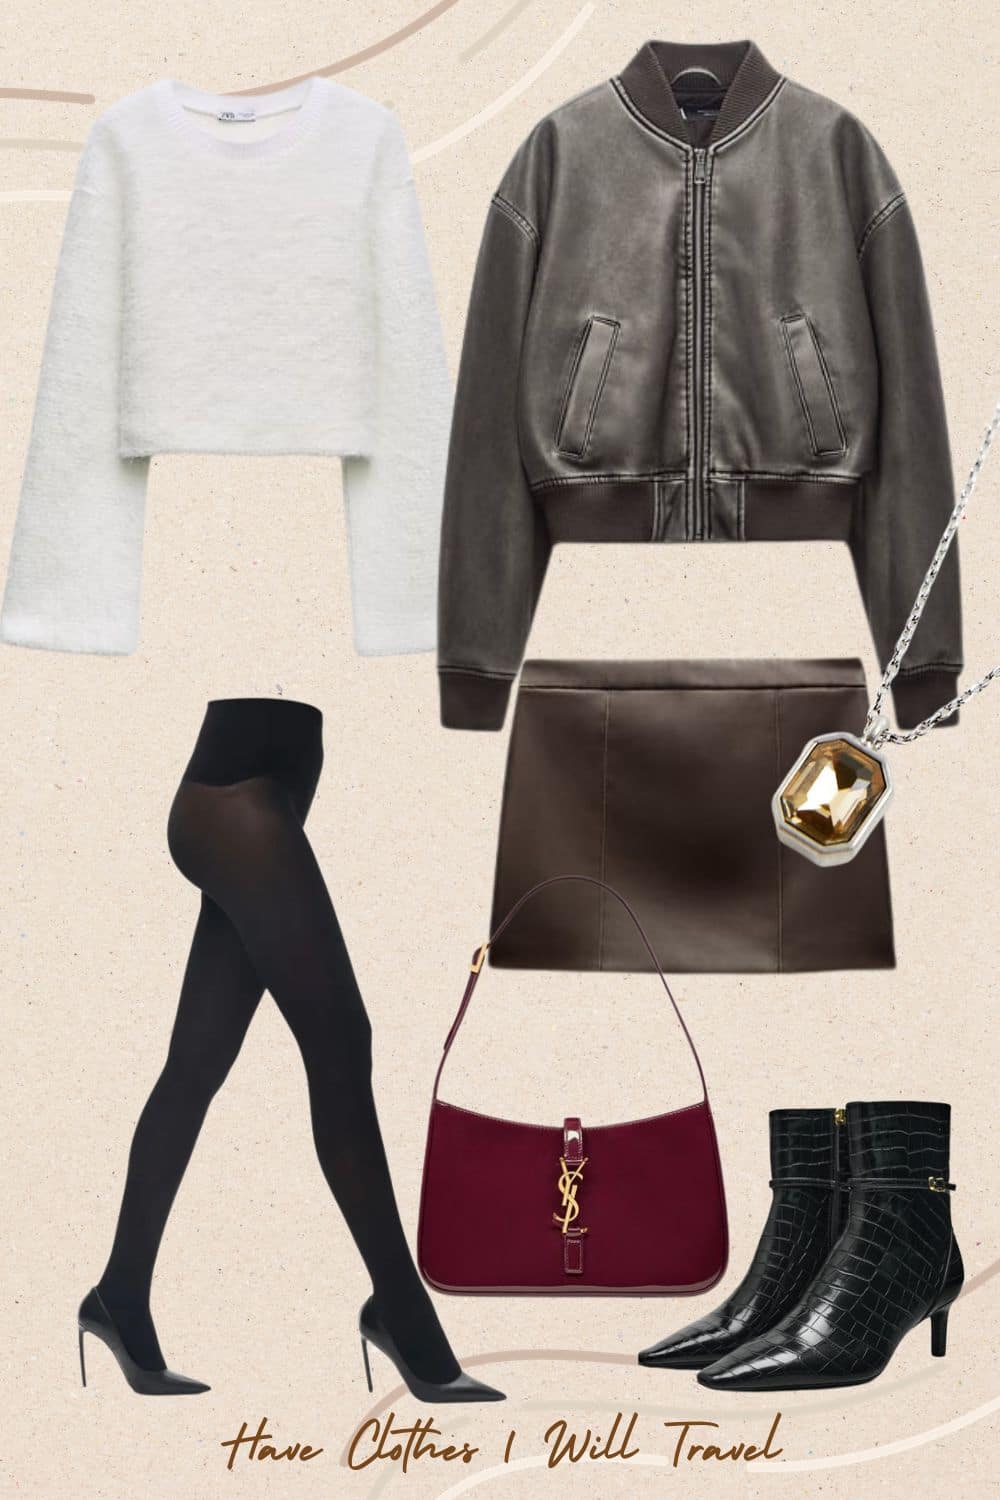 A date night outfit featuringa white sweater, leather mini skirt, black tights, and leather ankle boots